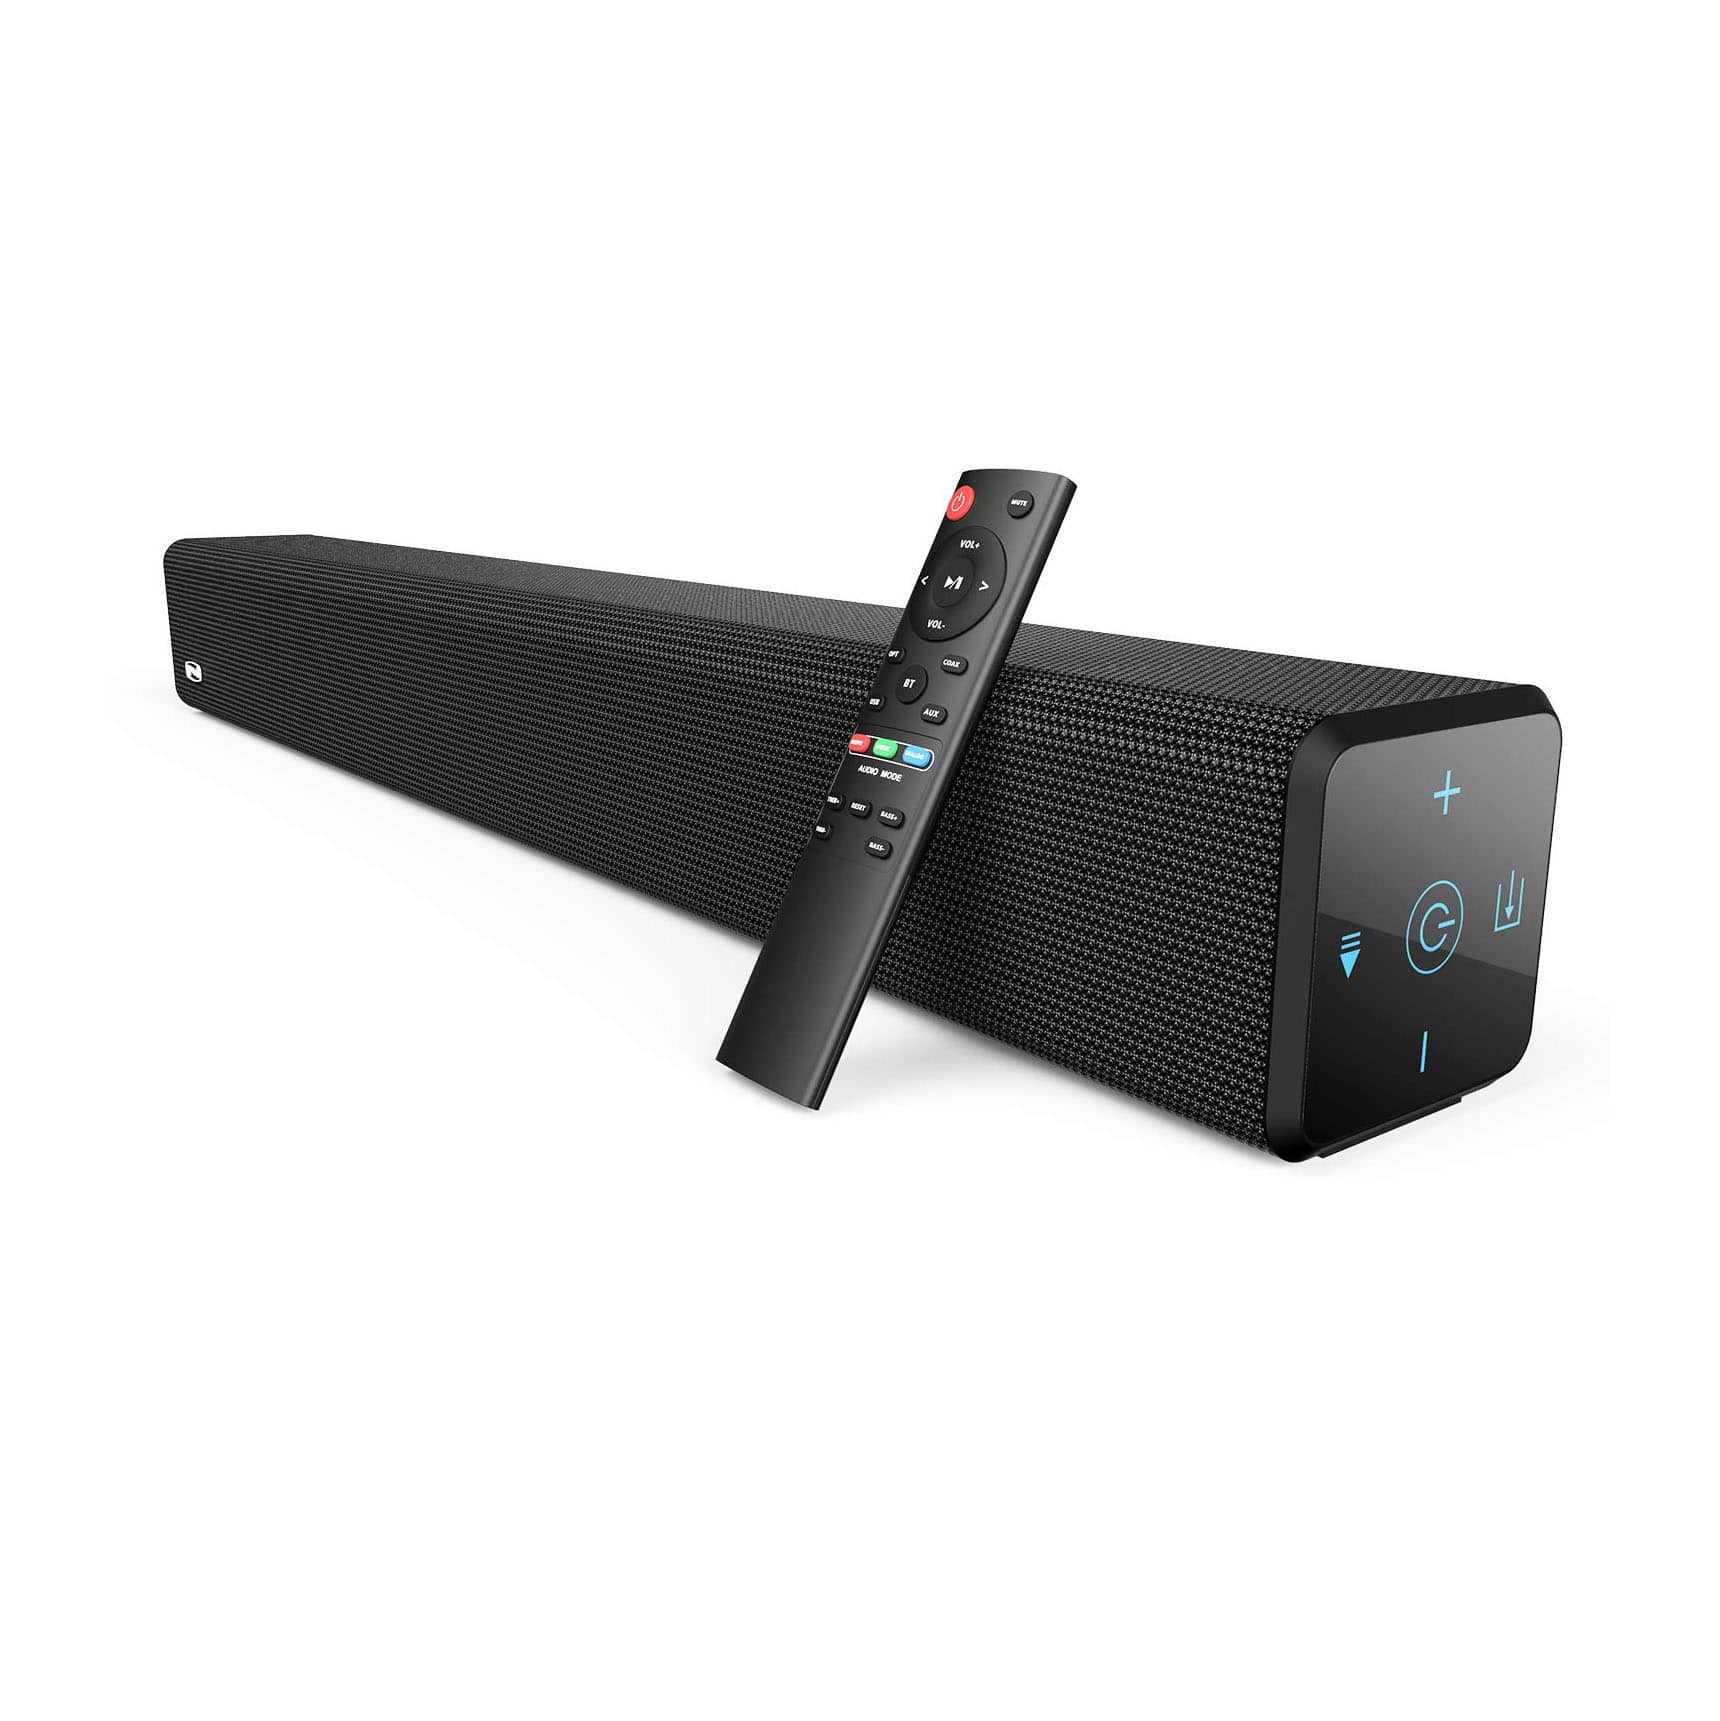 Top 10 Best Sound Bars with Builtin Subwoofers in 2022 Reviews